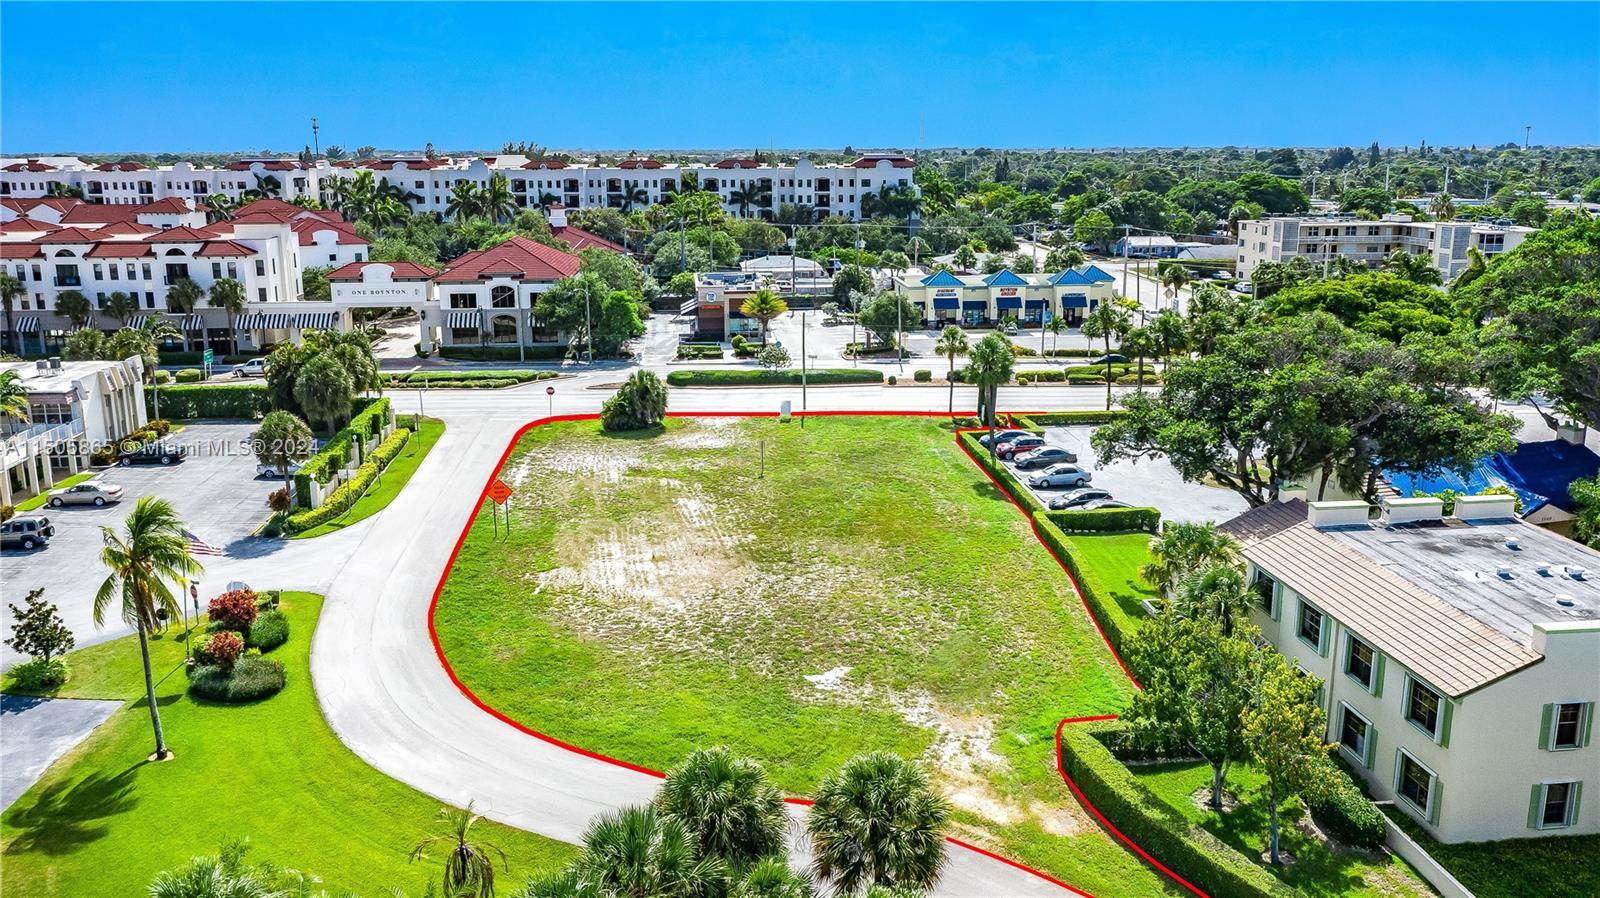 REMAX 360 is pleased to present the potential of "BOYNTON BEACH" at this location. This property enc